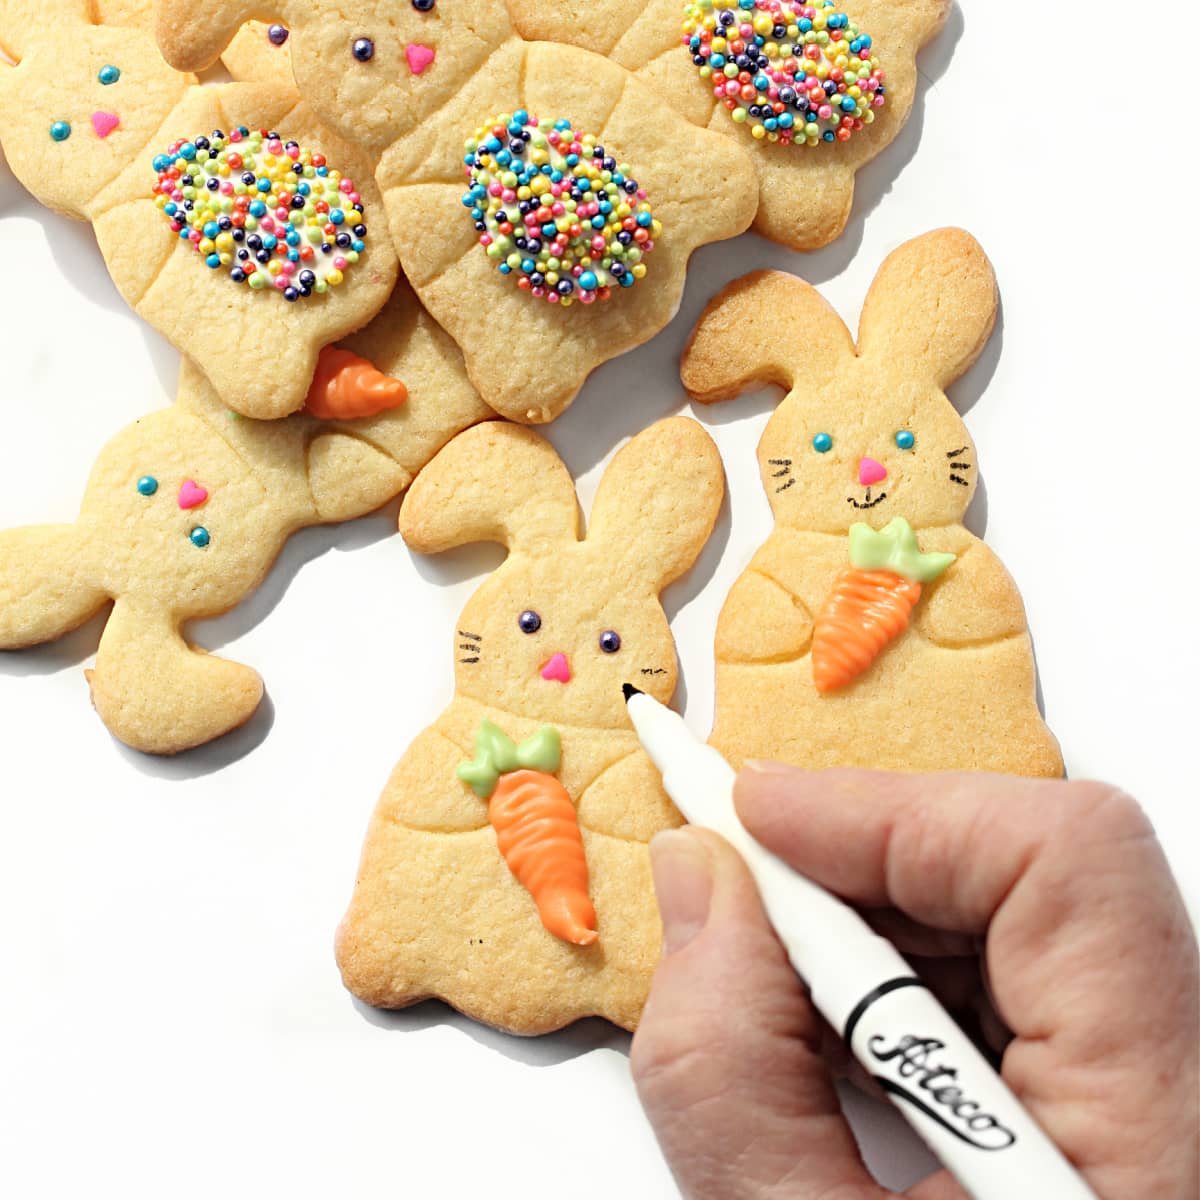 Add whiskers and mouth to each cookie using a food coloring marker.